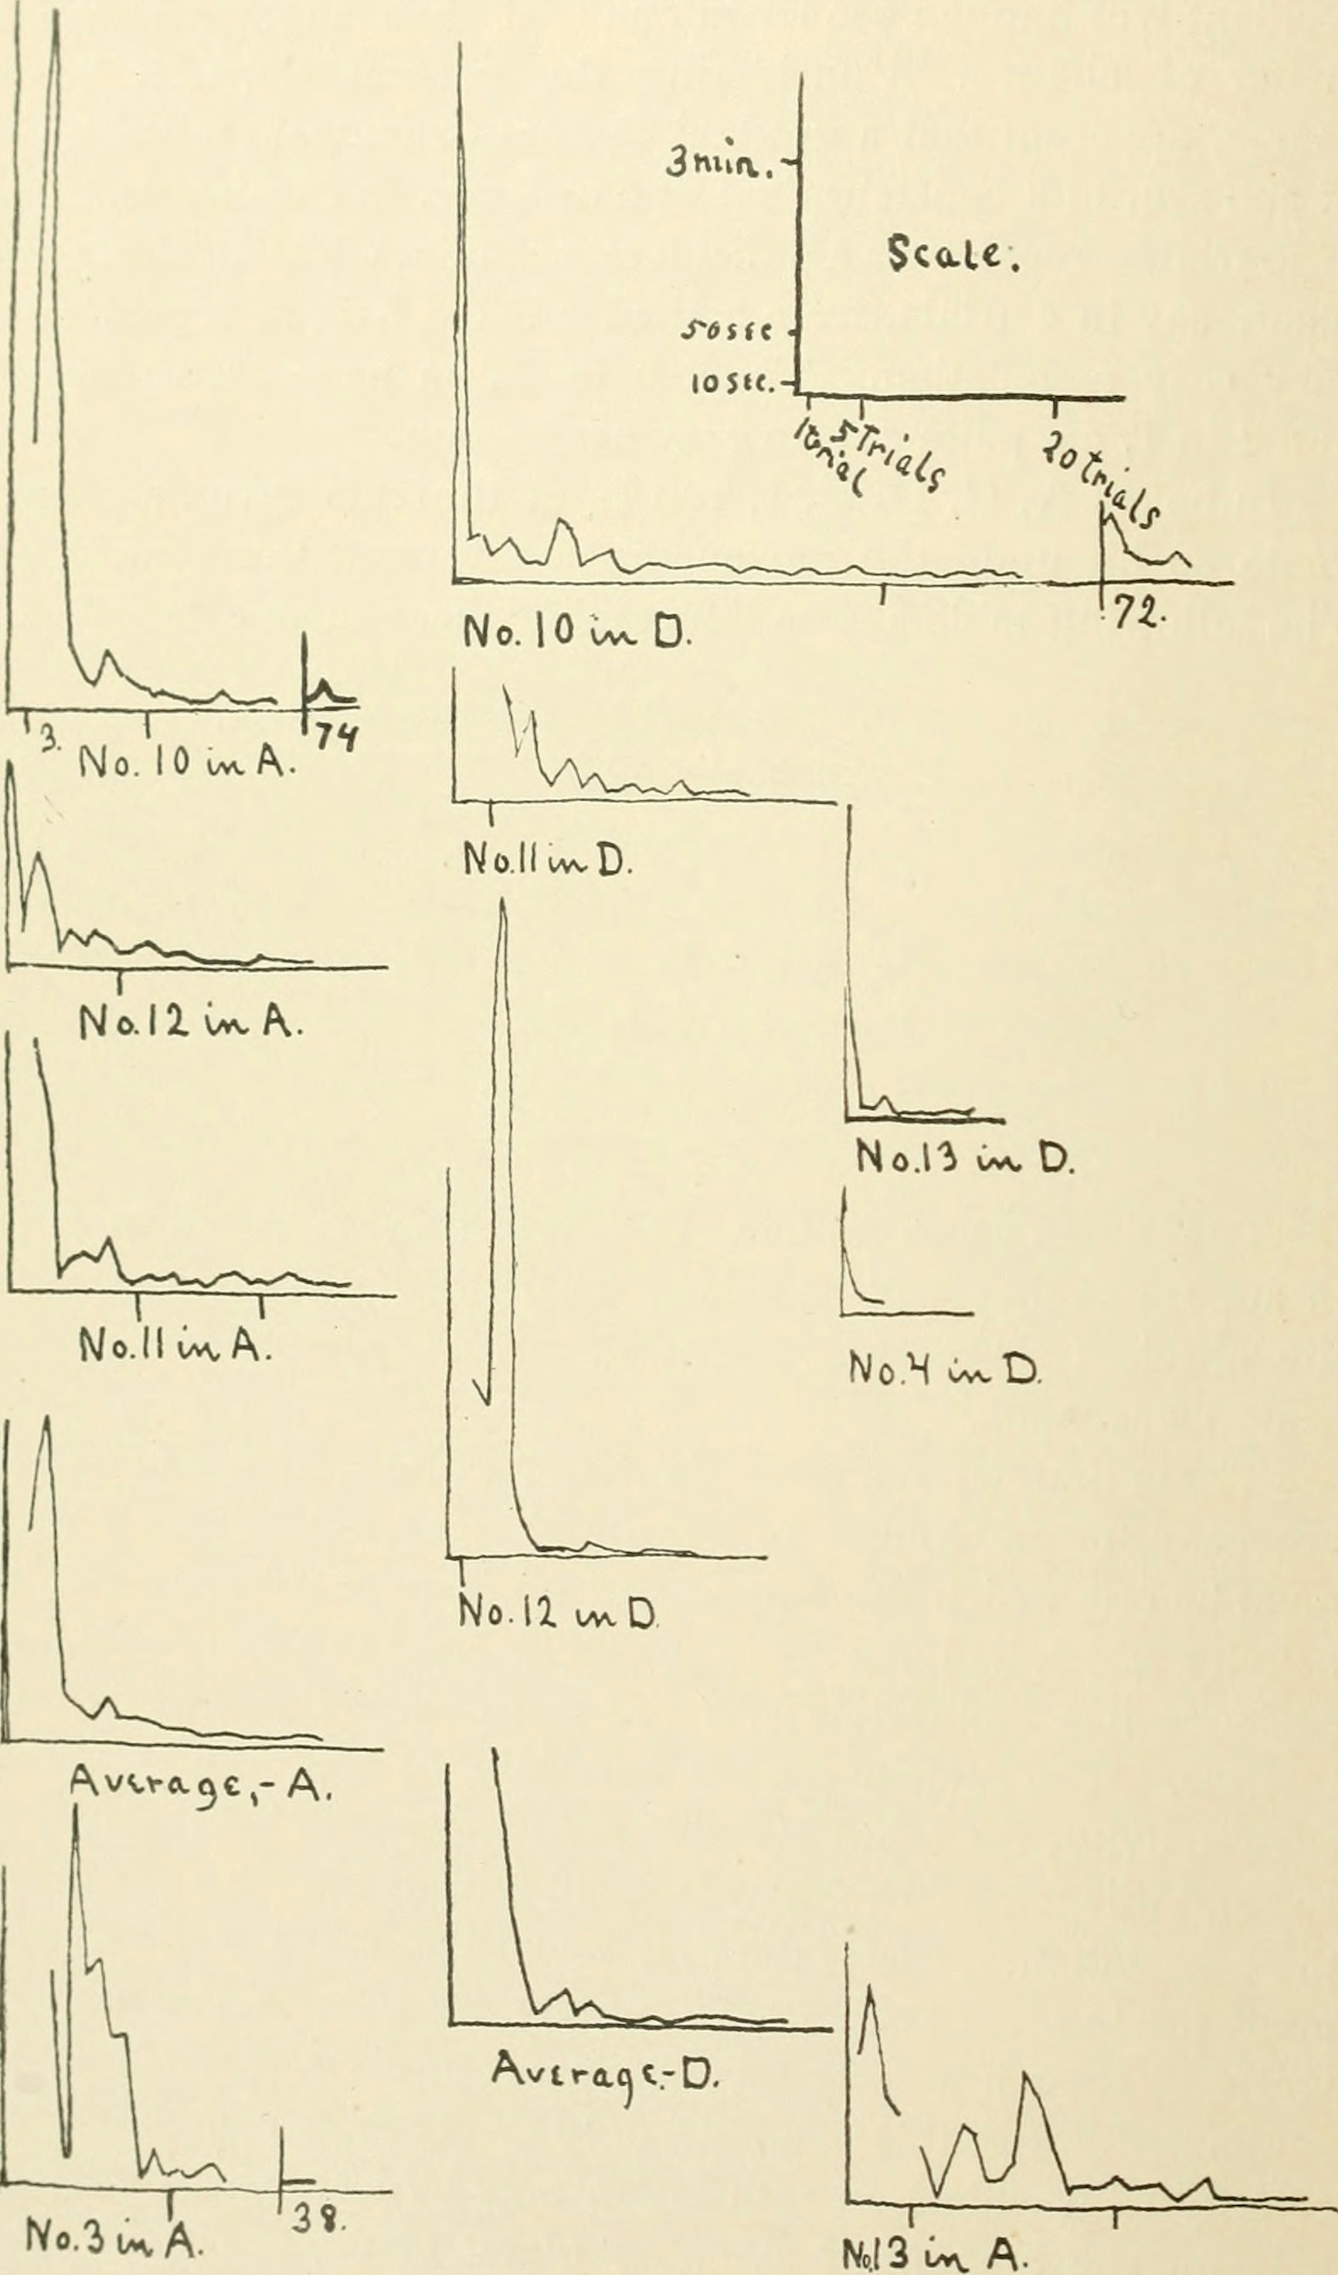 A yellowed page with pen-drawn graphs showing spikes on the very left declining down to very low wiggles to the right.